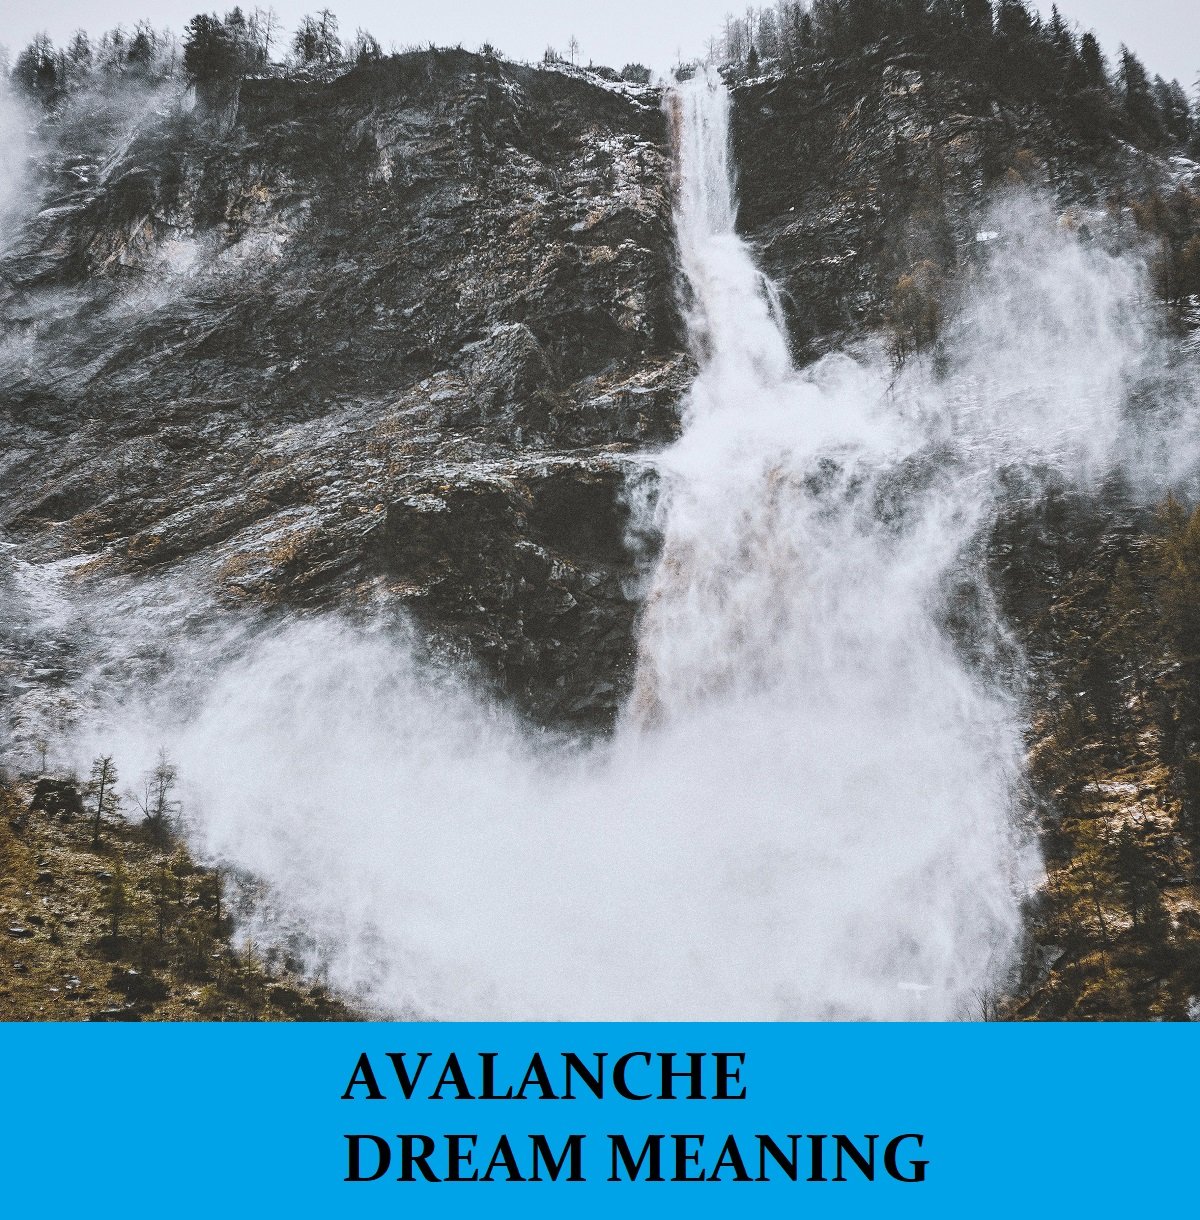 Dream About Avalanche